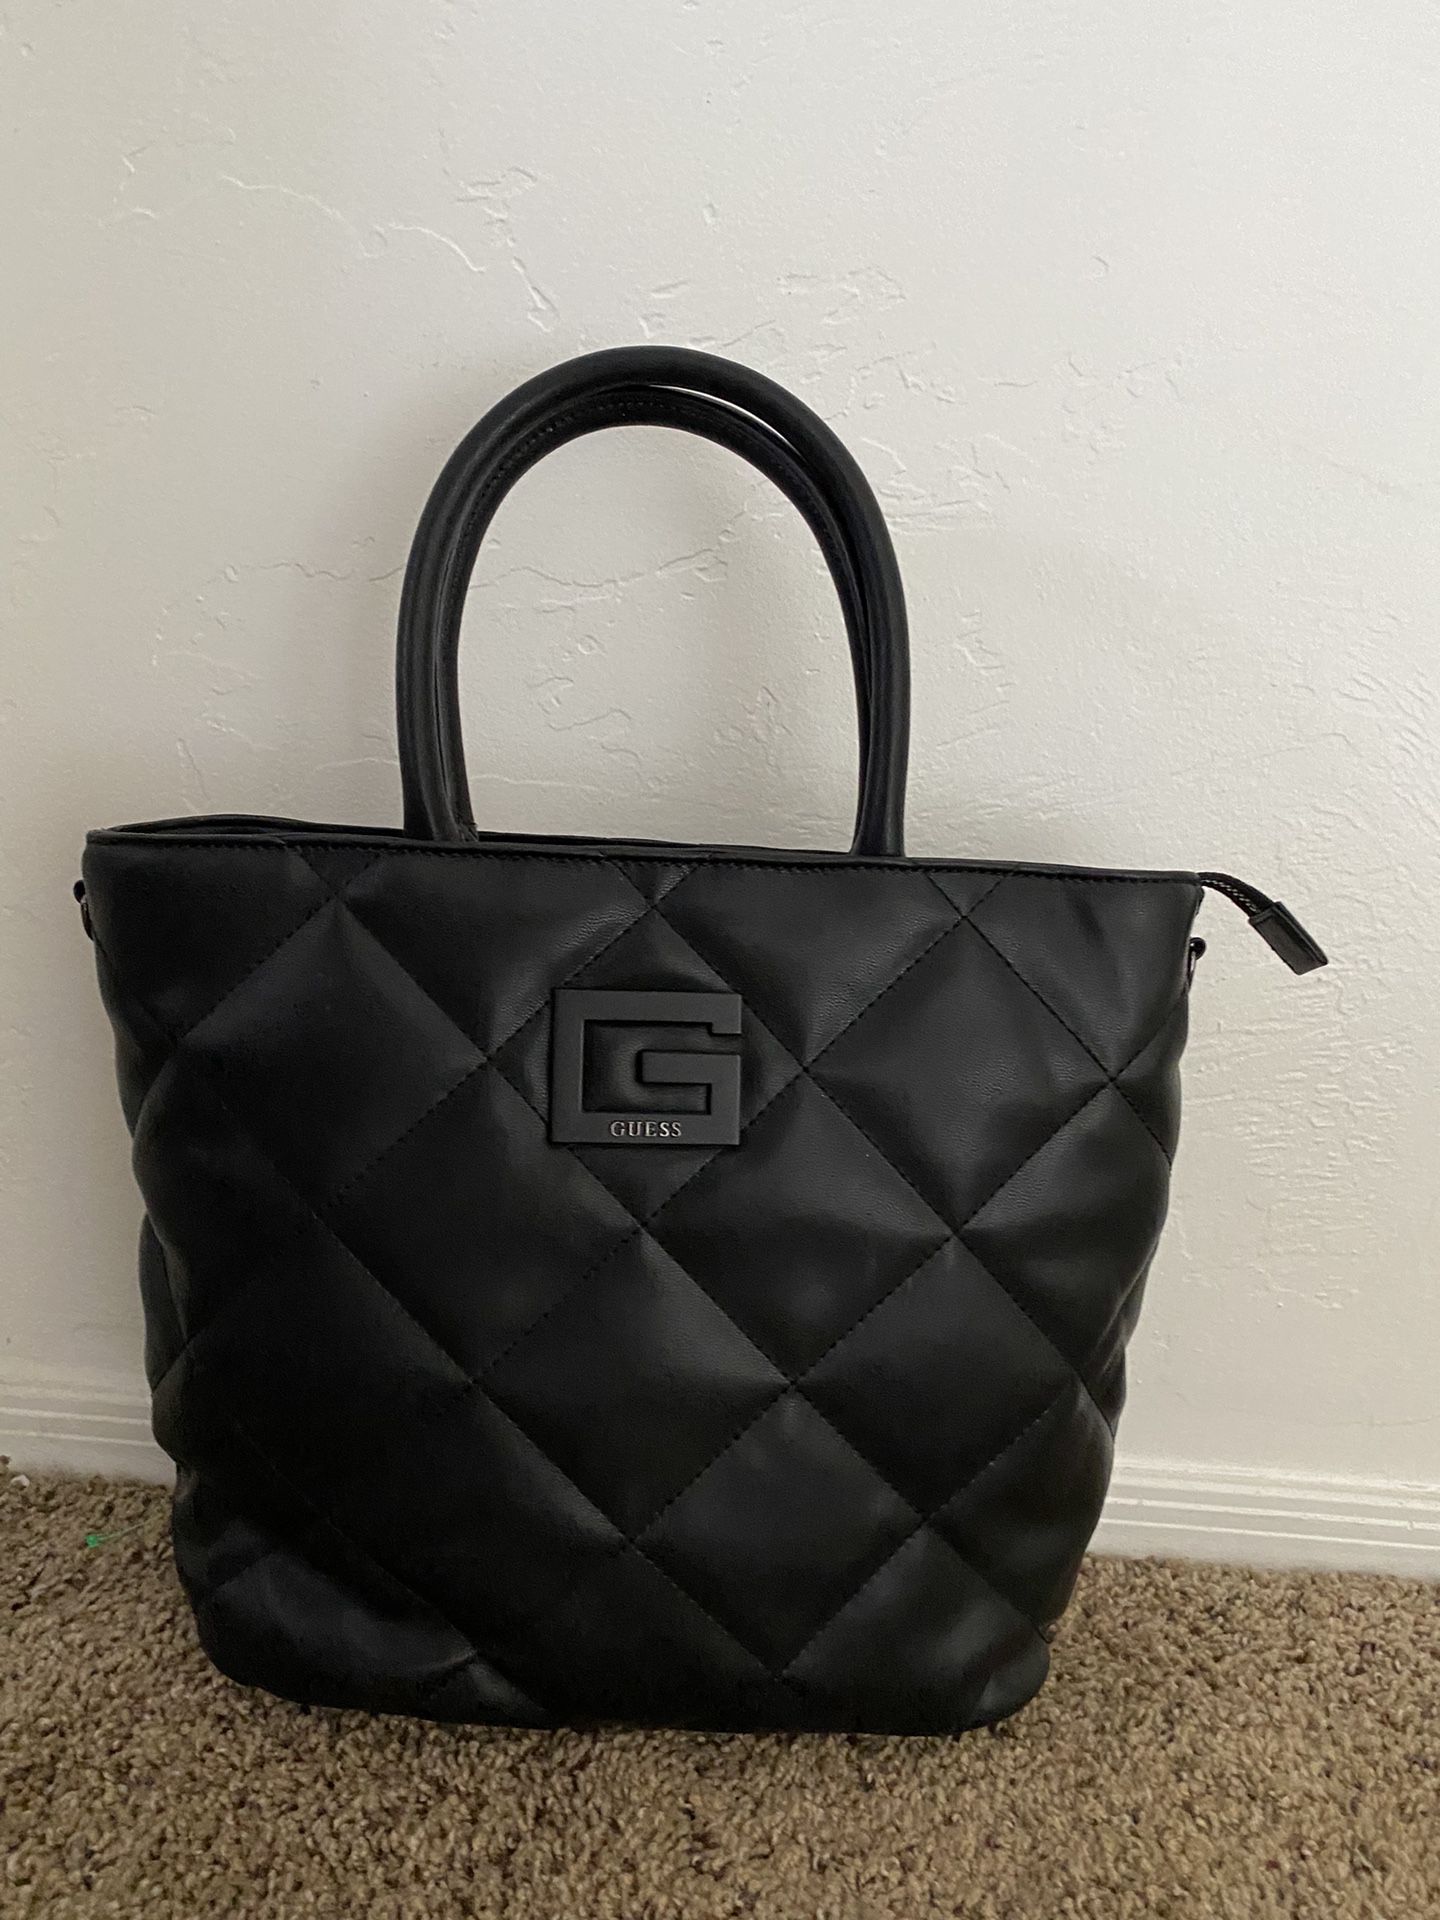 G By Guess Brand New Black Bag